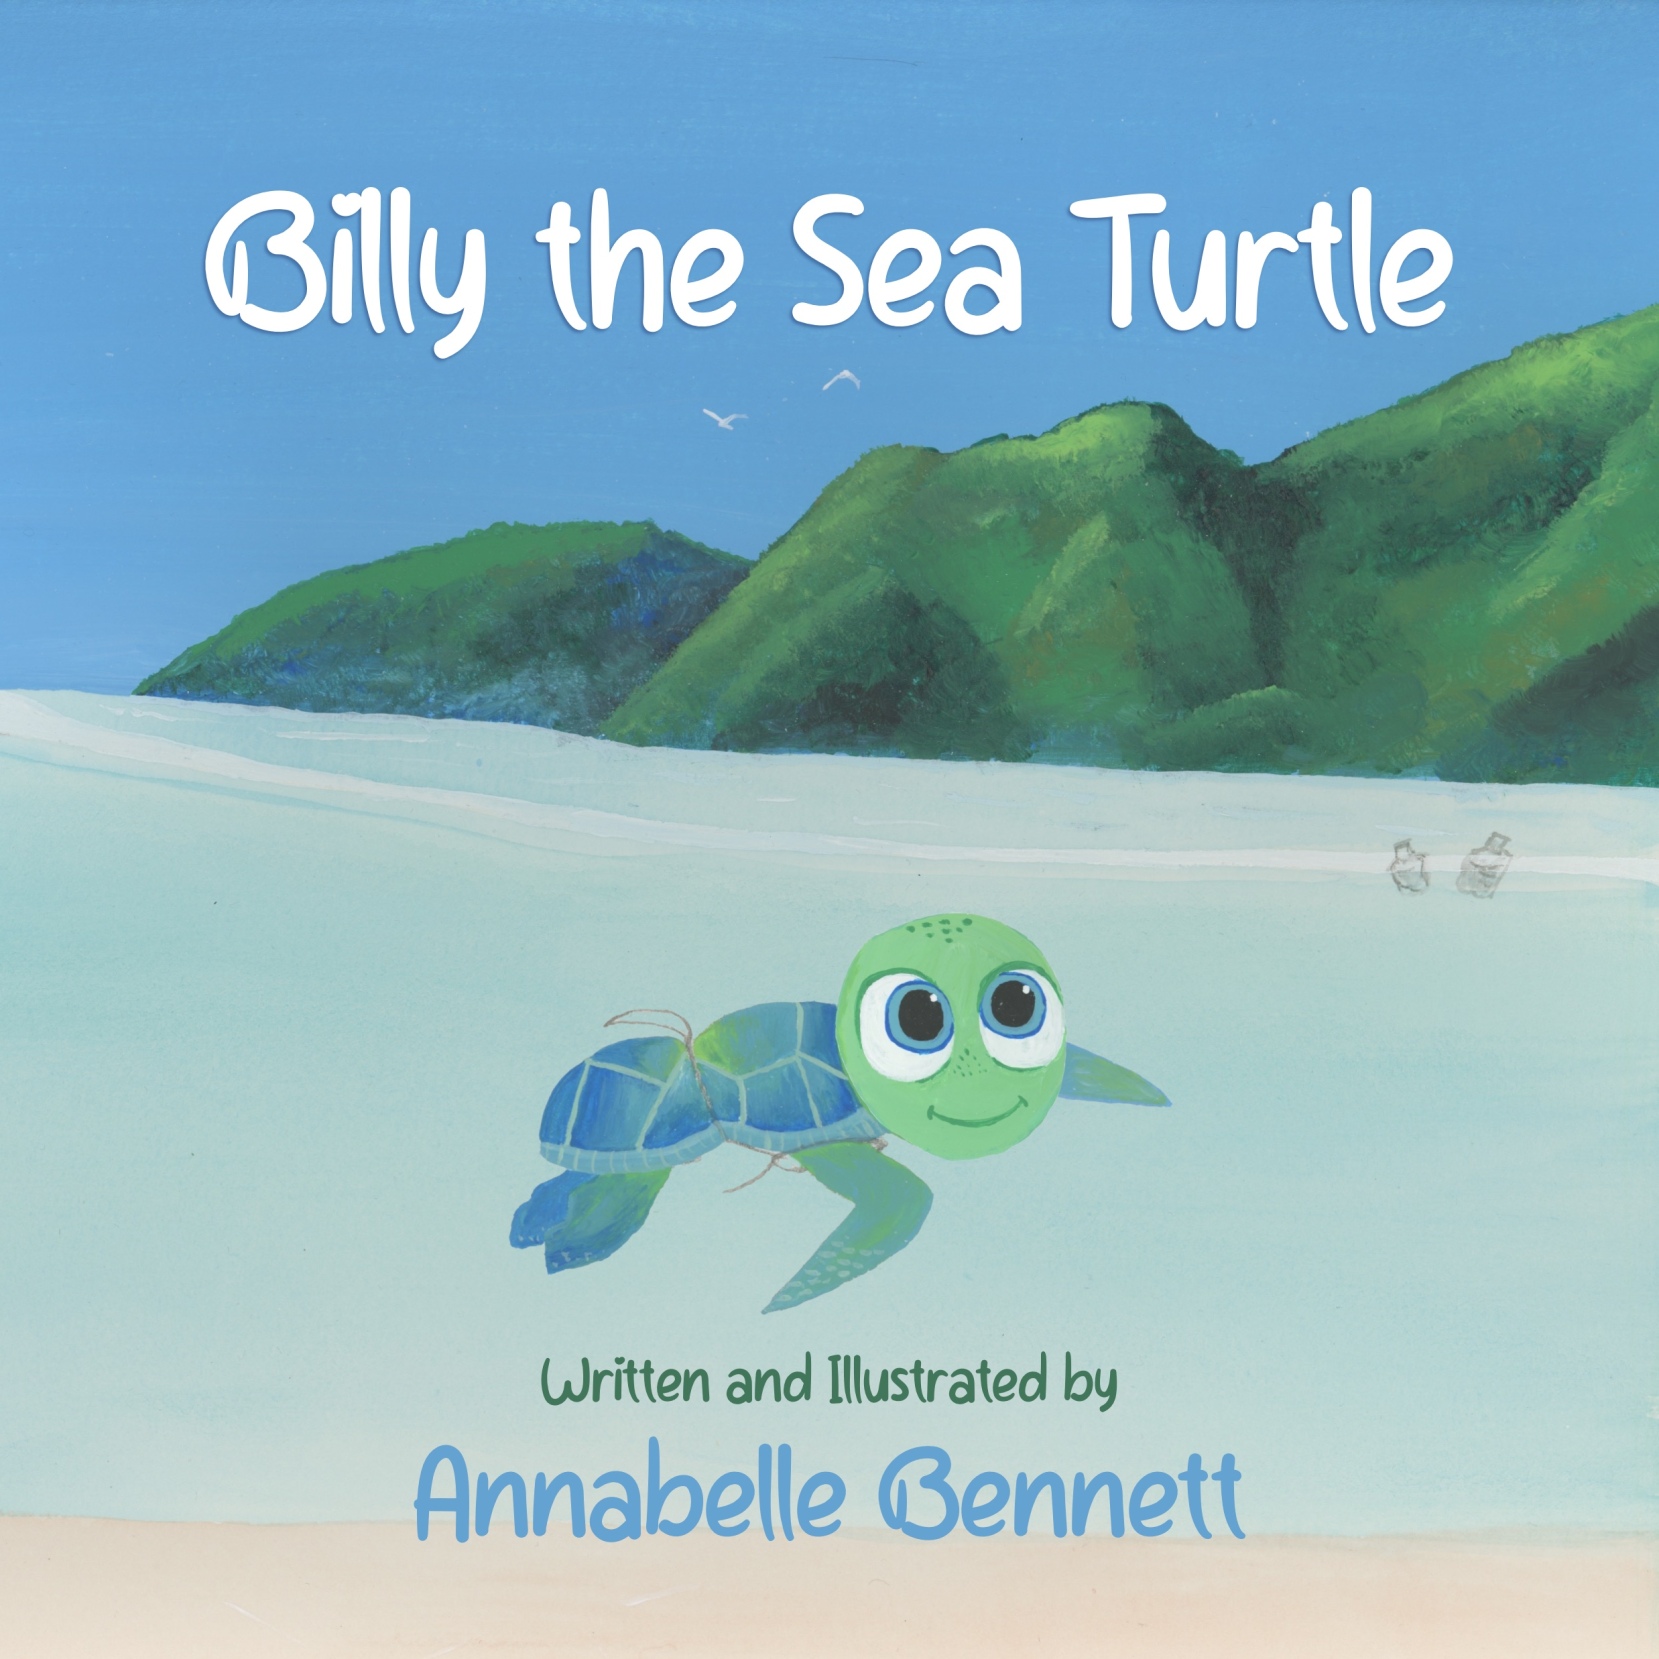 Billy the Sea Turtle / Written & Illustrated by Annabelle Bennett